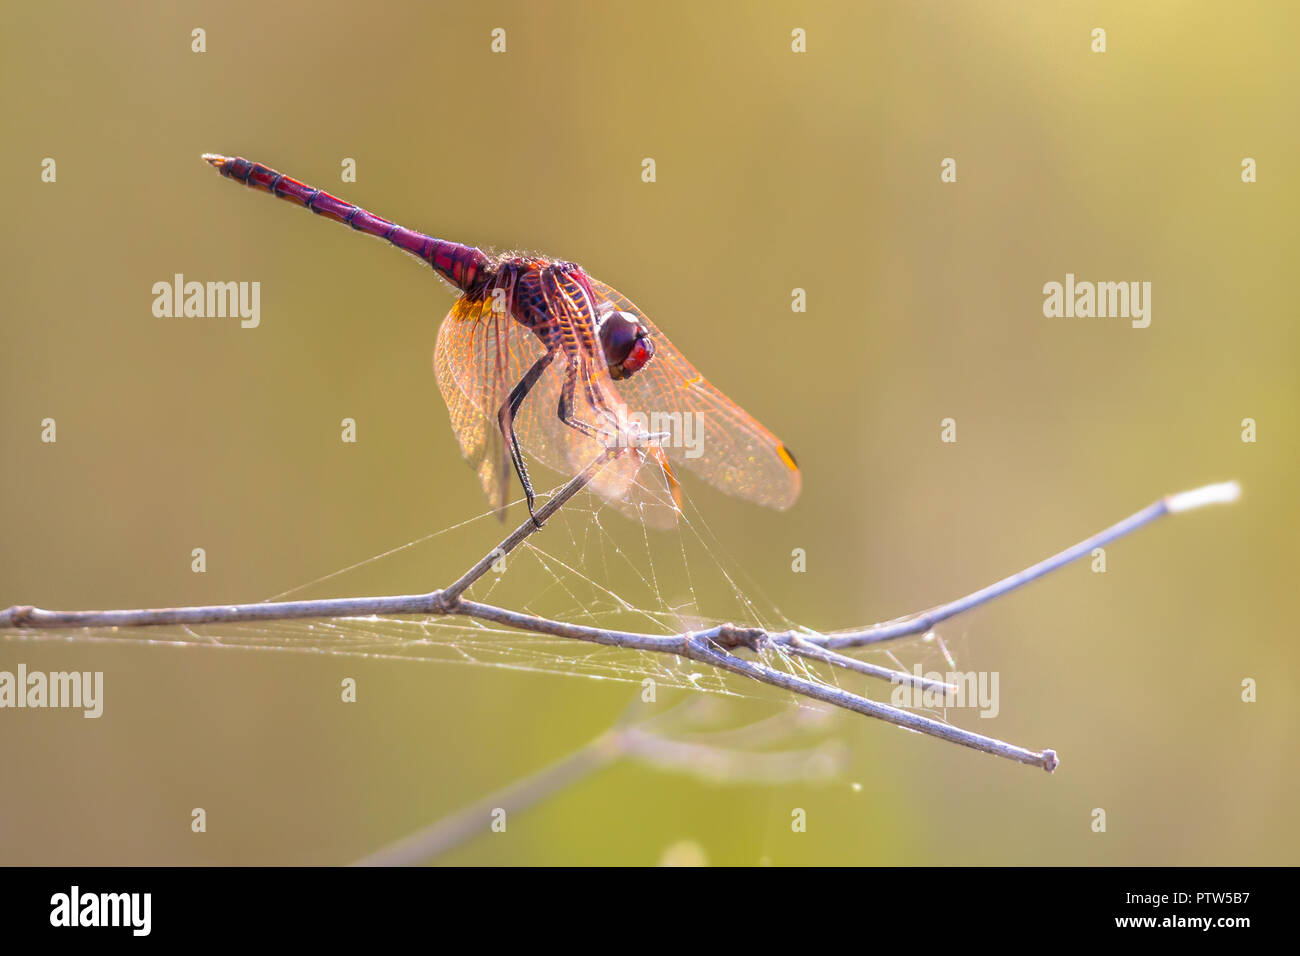 Violet dropwing (Trithemis annulata) darter dragonfly perched on a stick near river in Cyprus Stock Photo